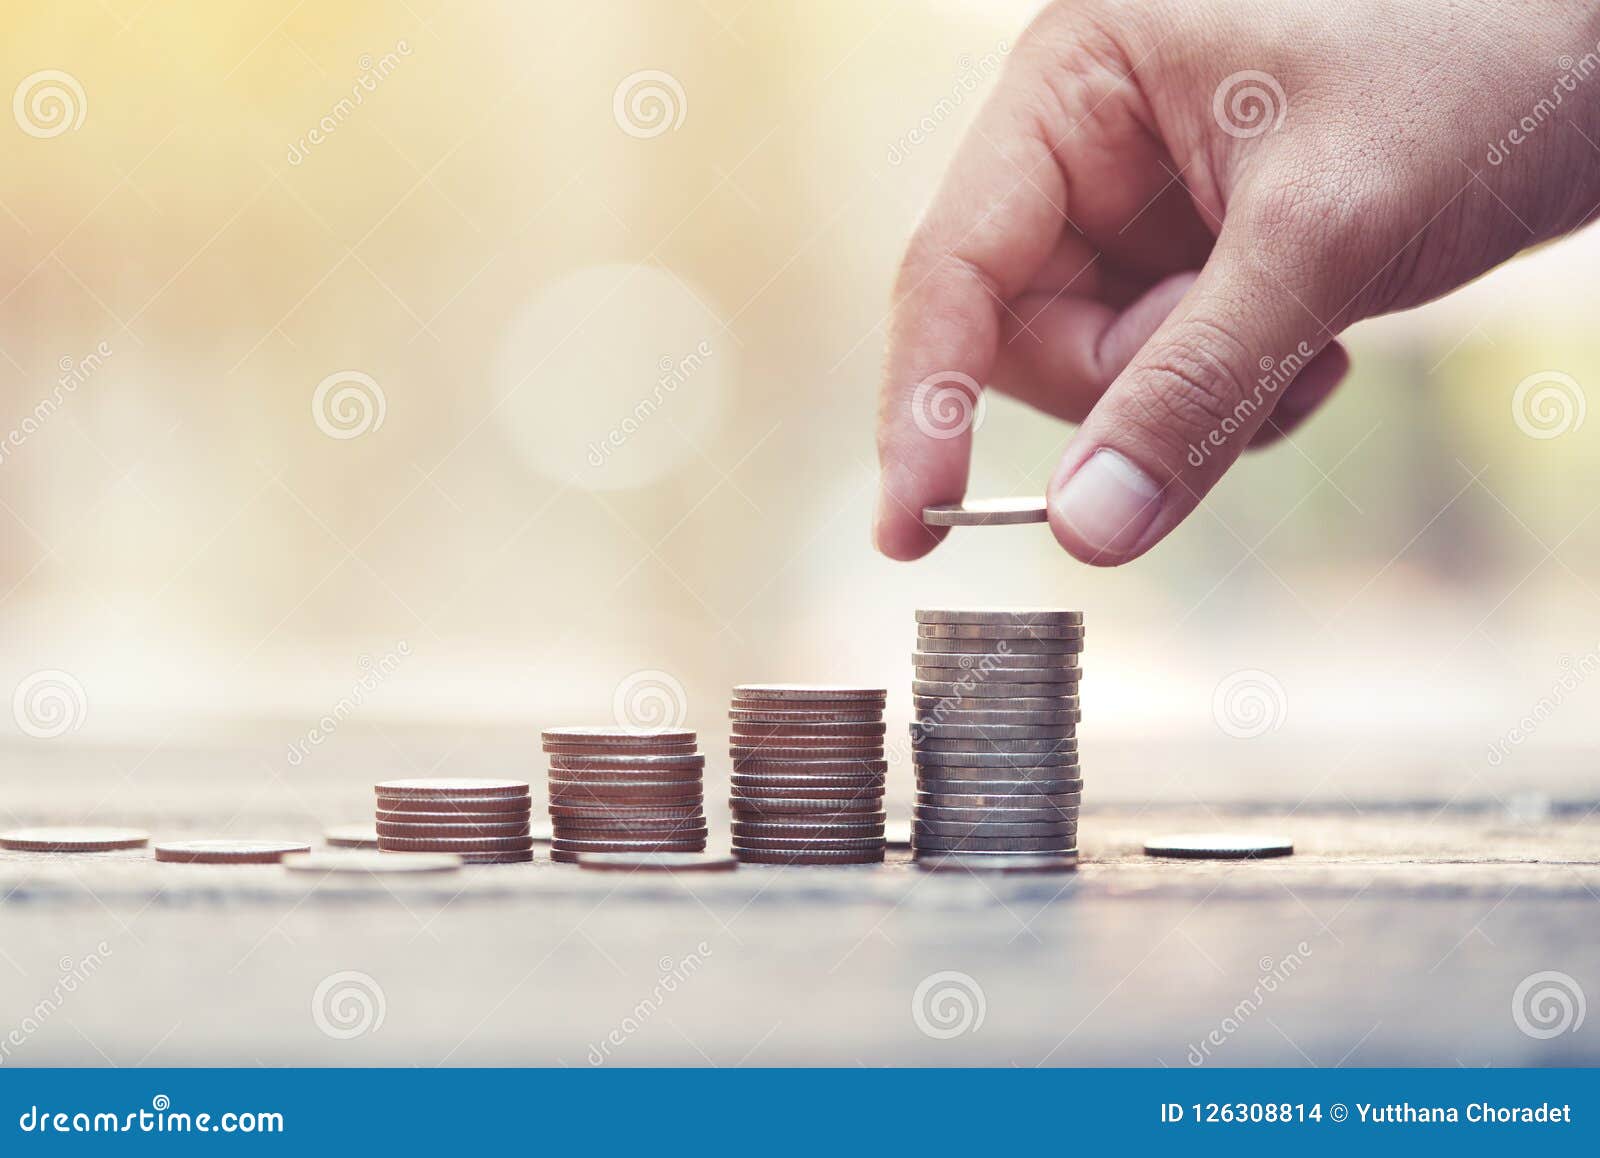 saving money concept. preset by male hand putting money coin stack.